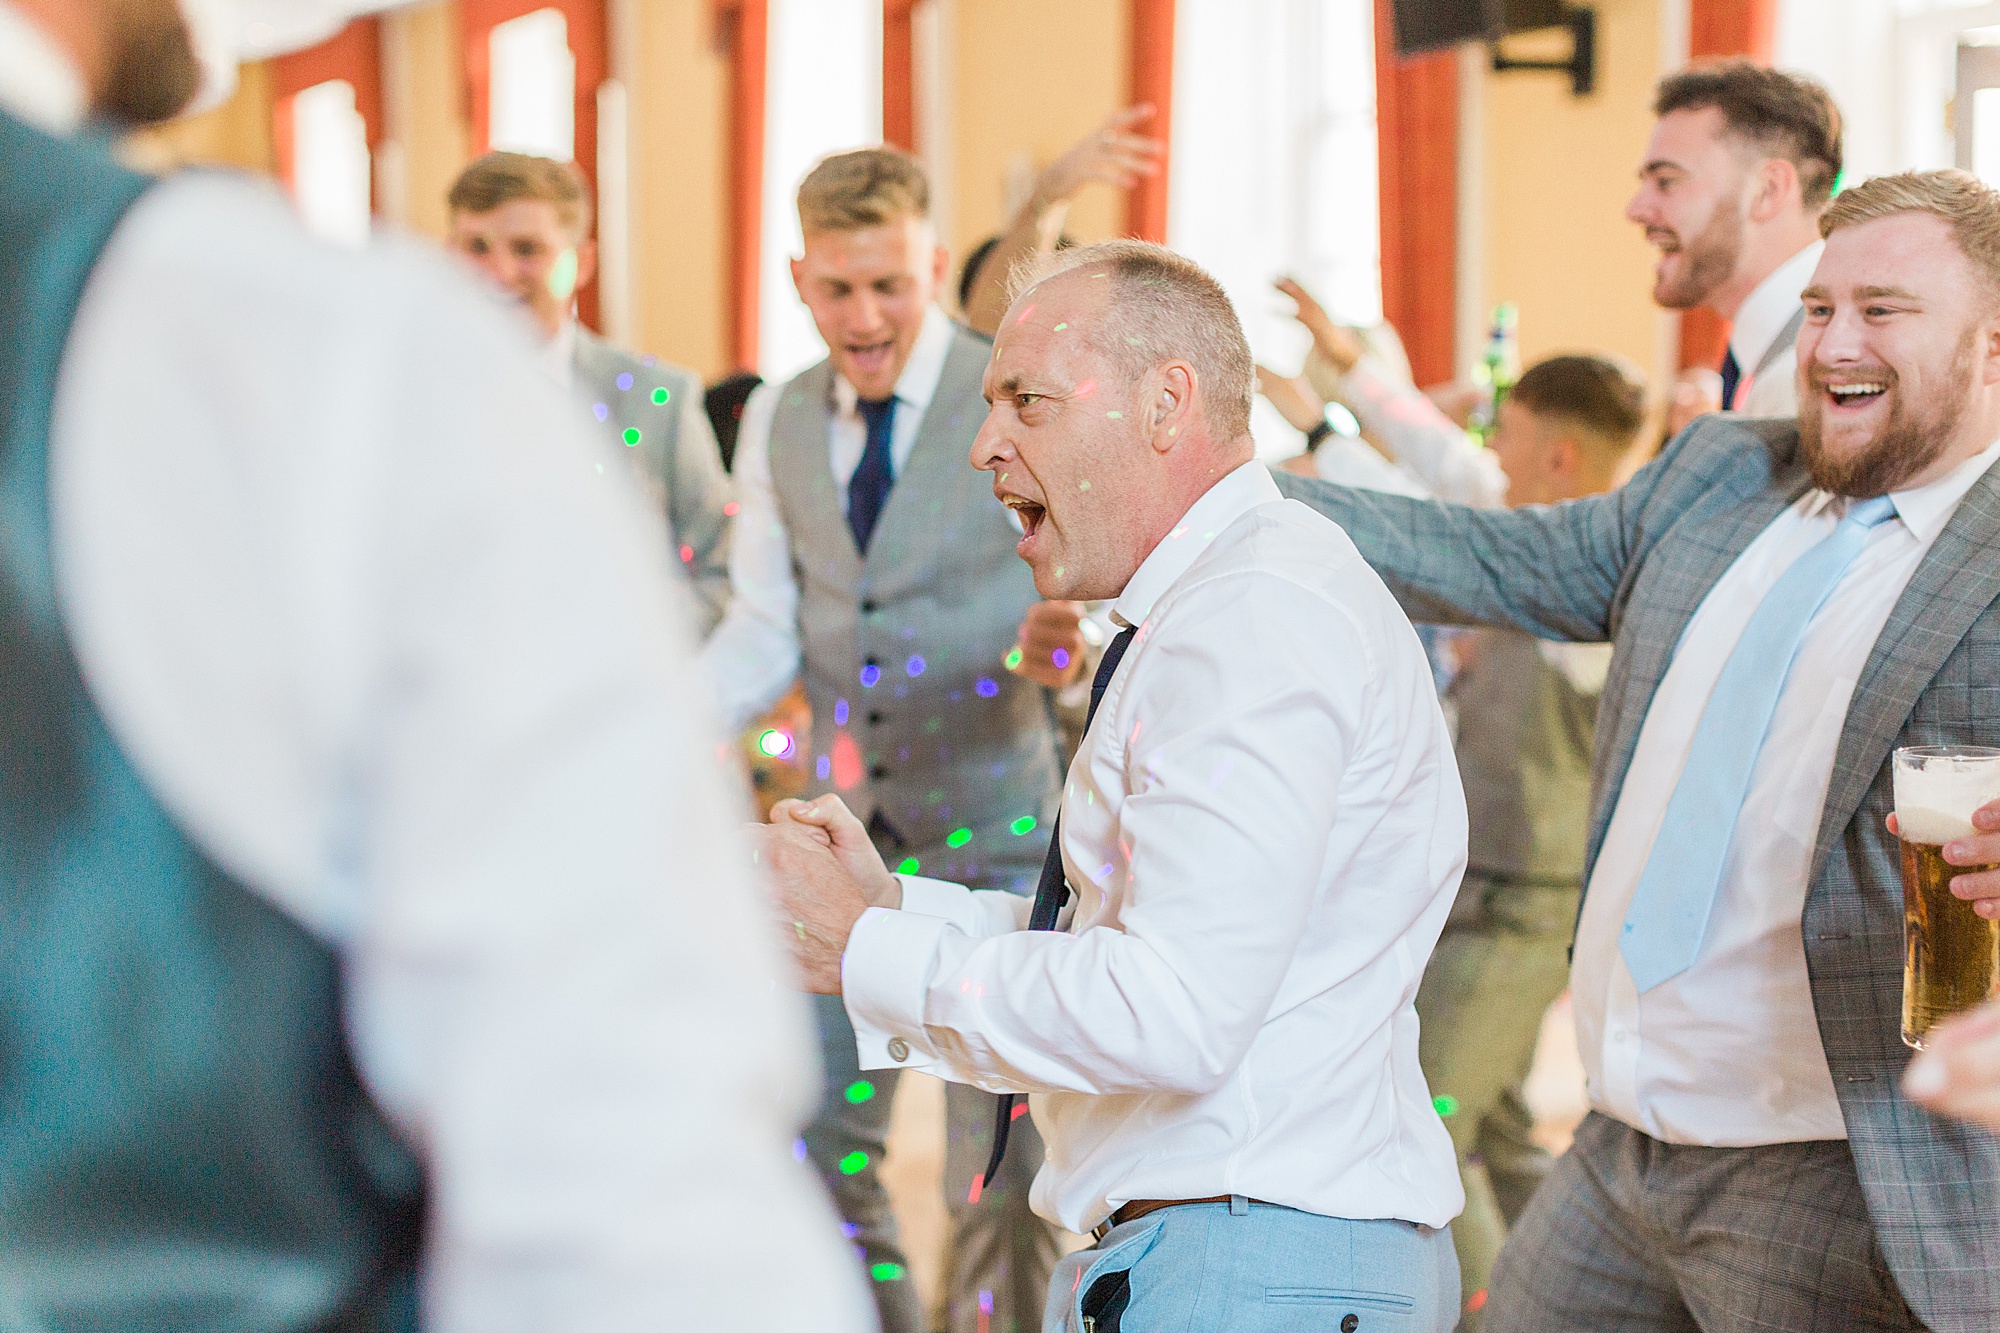 image shows guests dancing and singing at a wedding reception in the evening, they're cheering, mouths open singing, enjoying themselves